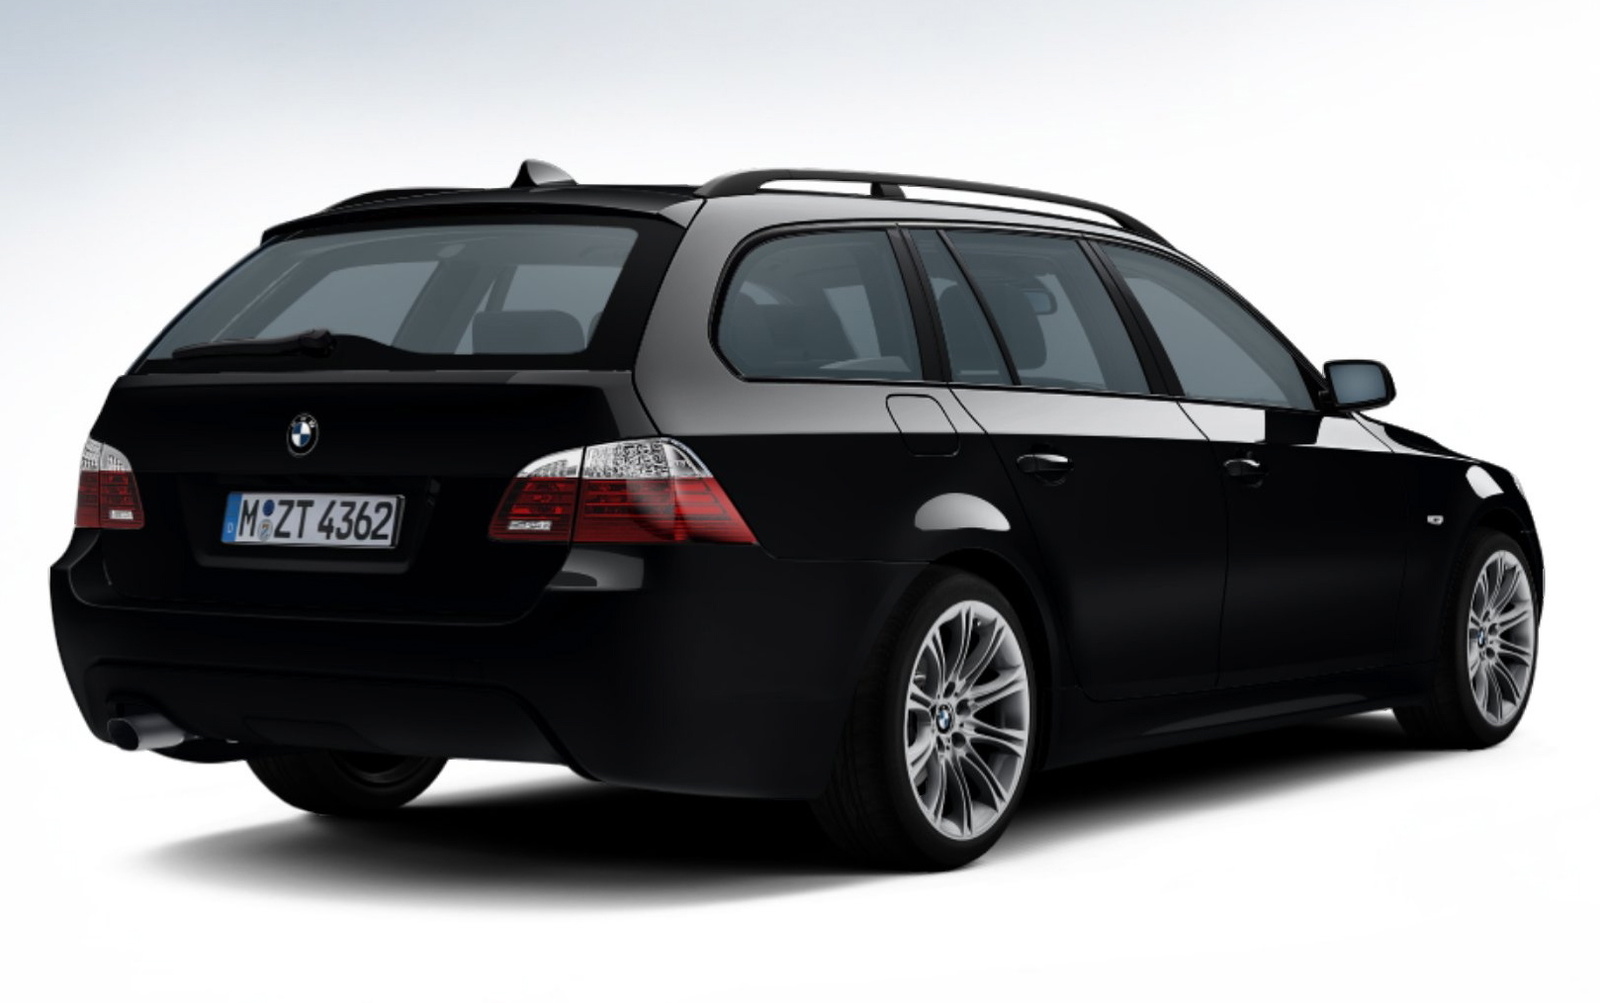 2007 Bmw 530xi with sports package